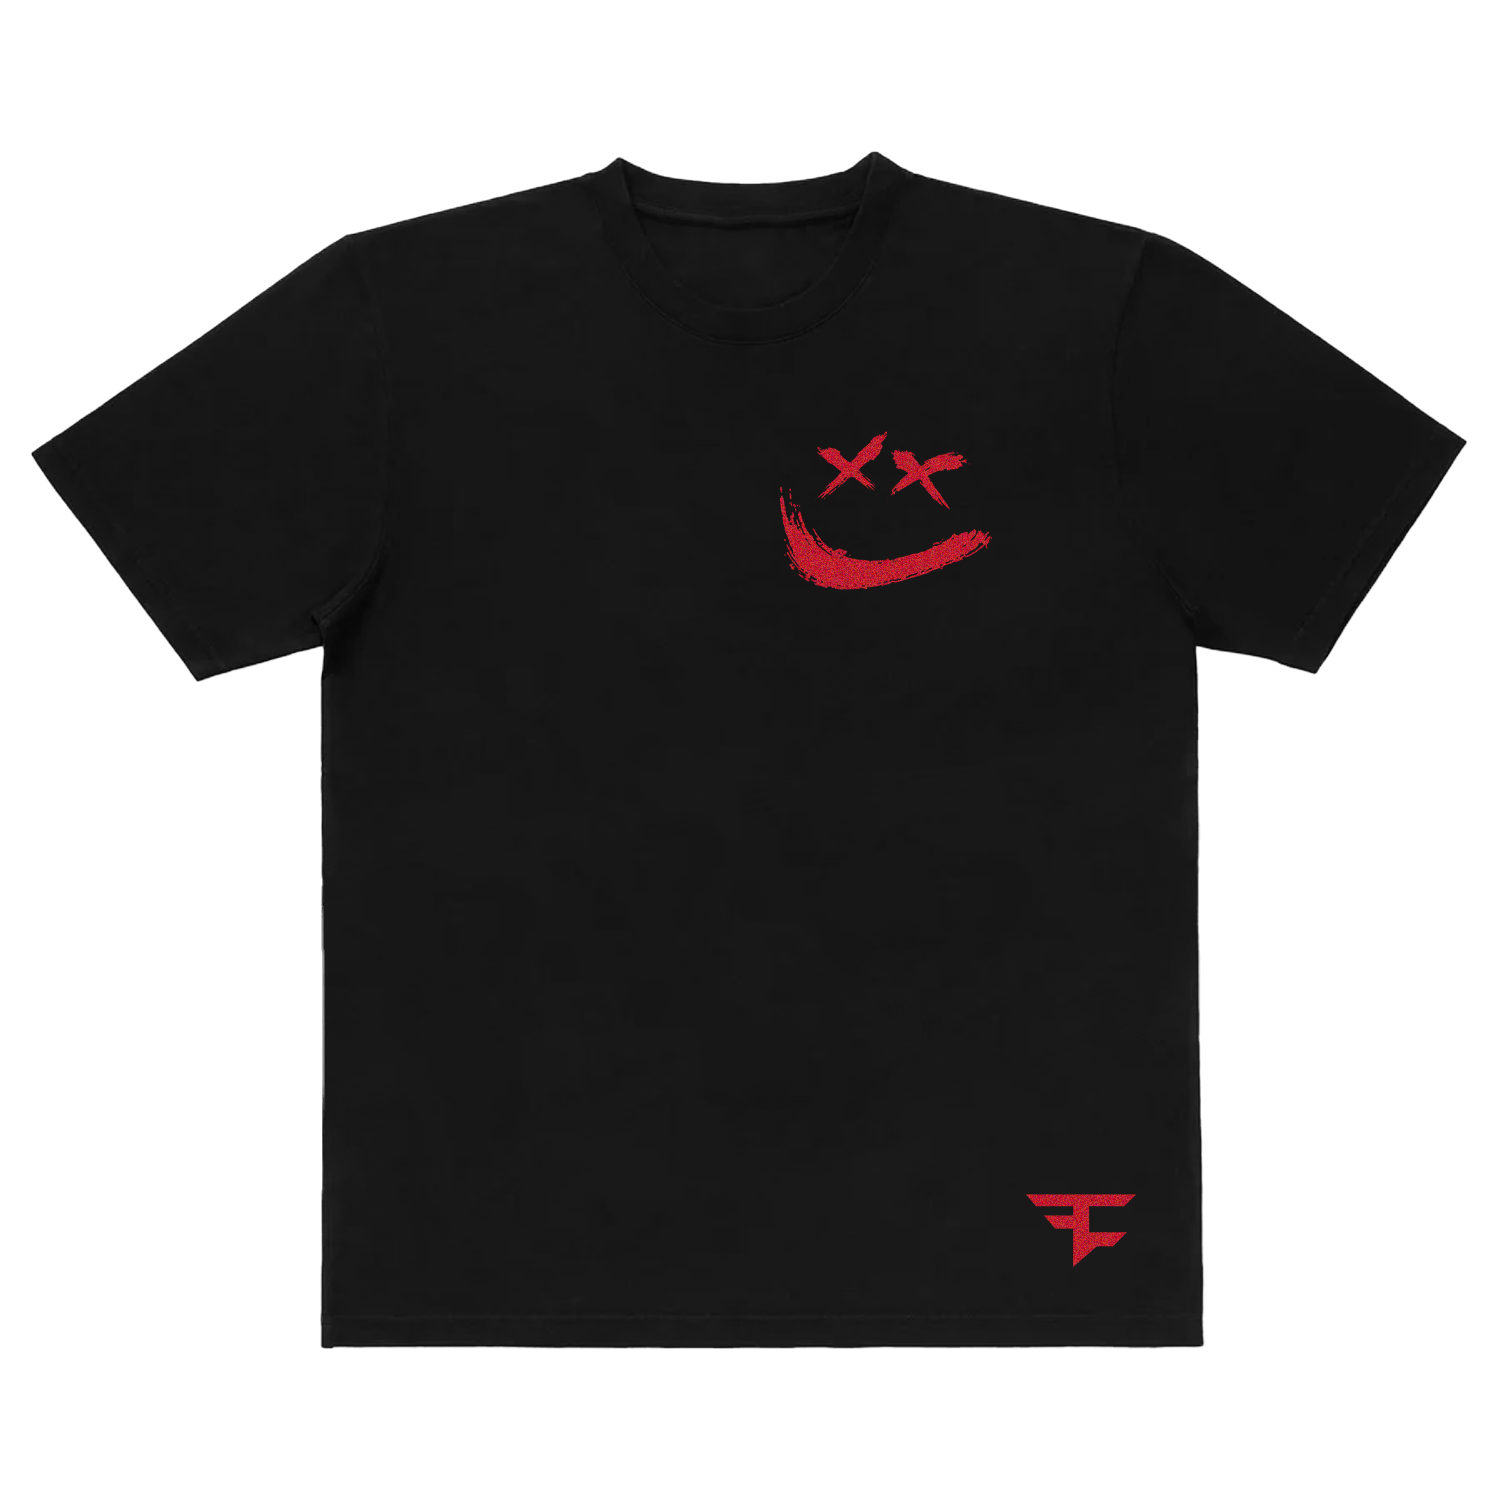 Limited Edition Smiley Tee